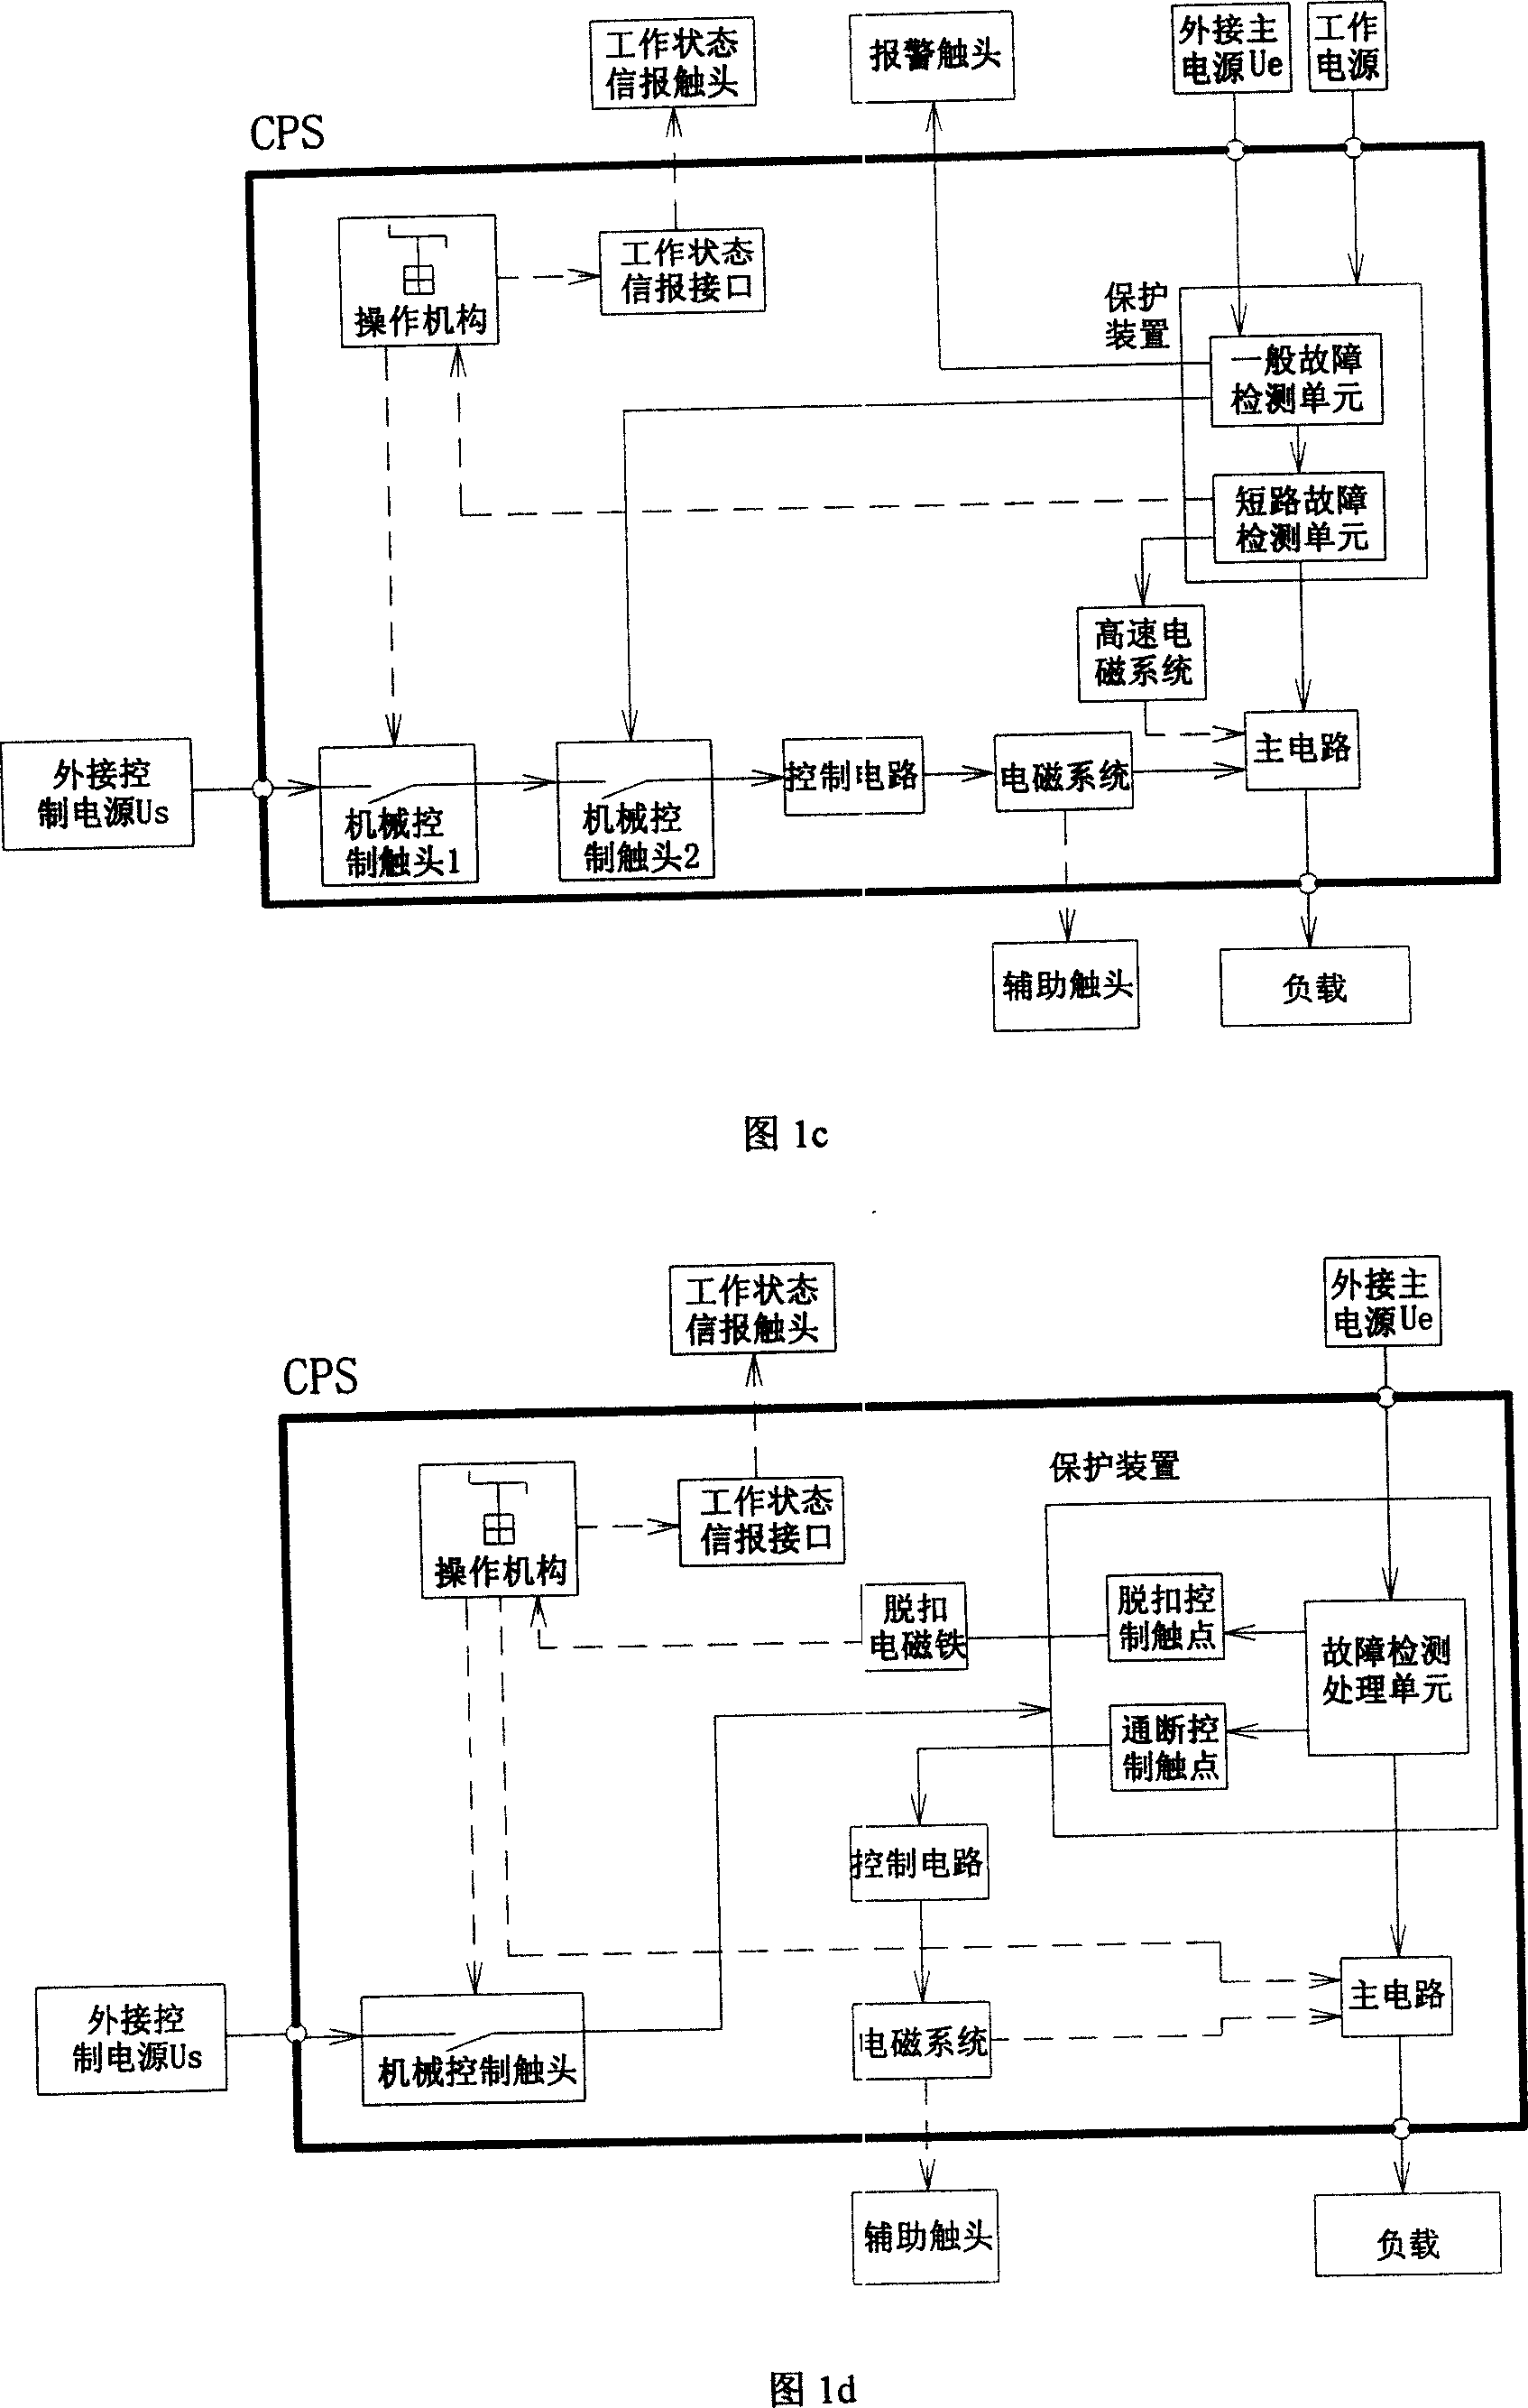 A multifunctional electric apparatus with programmable and trip circuit output